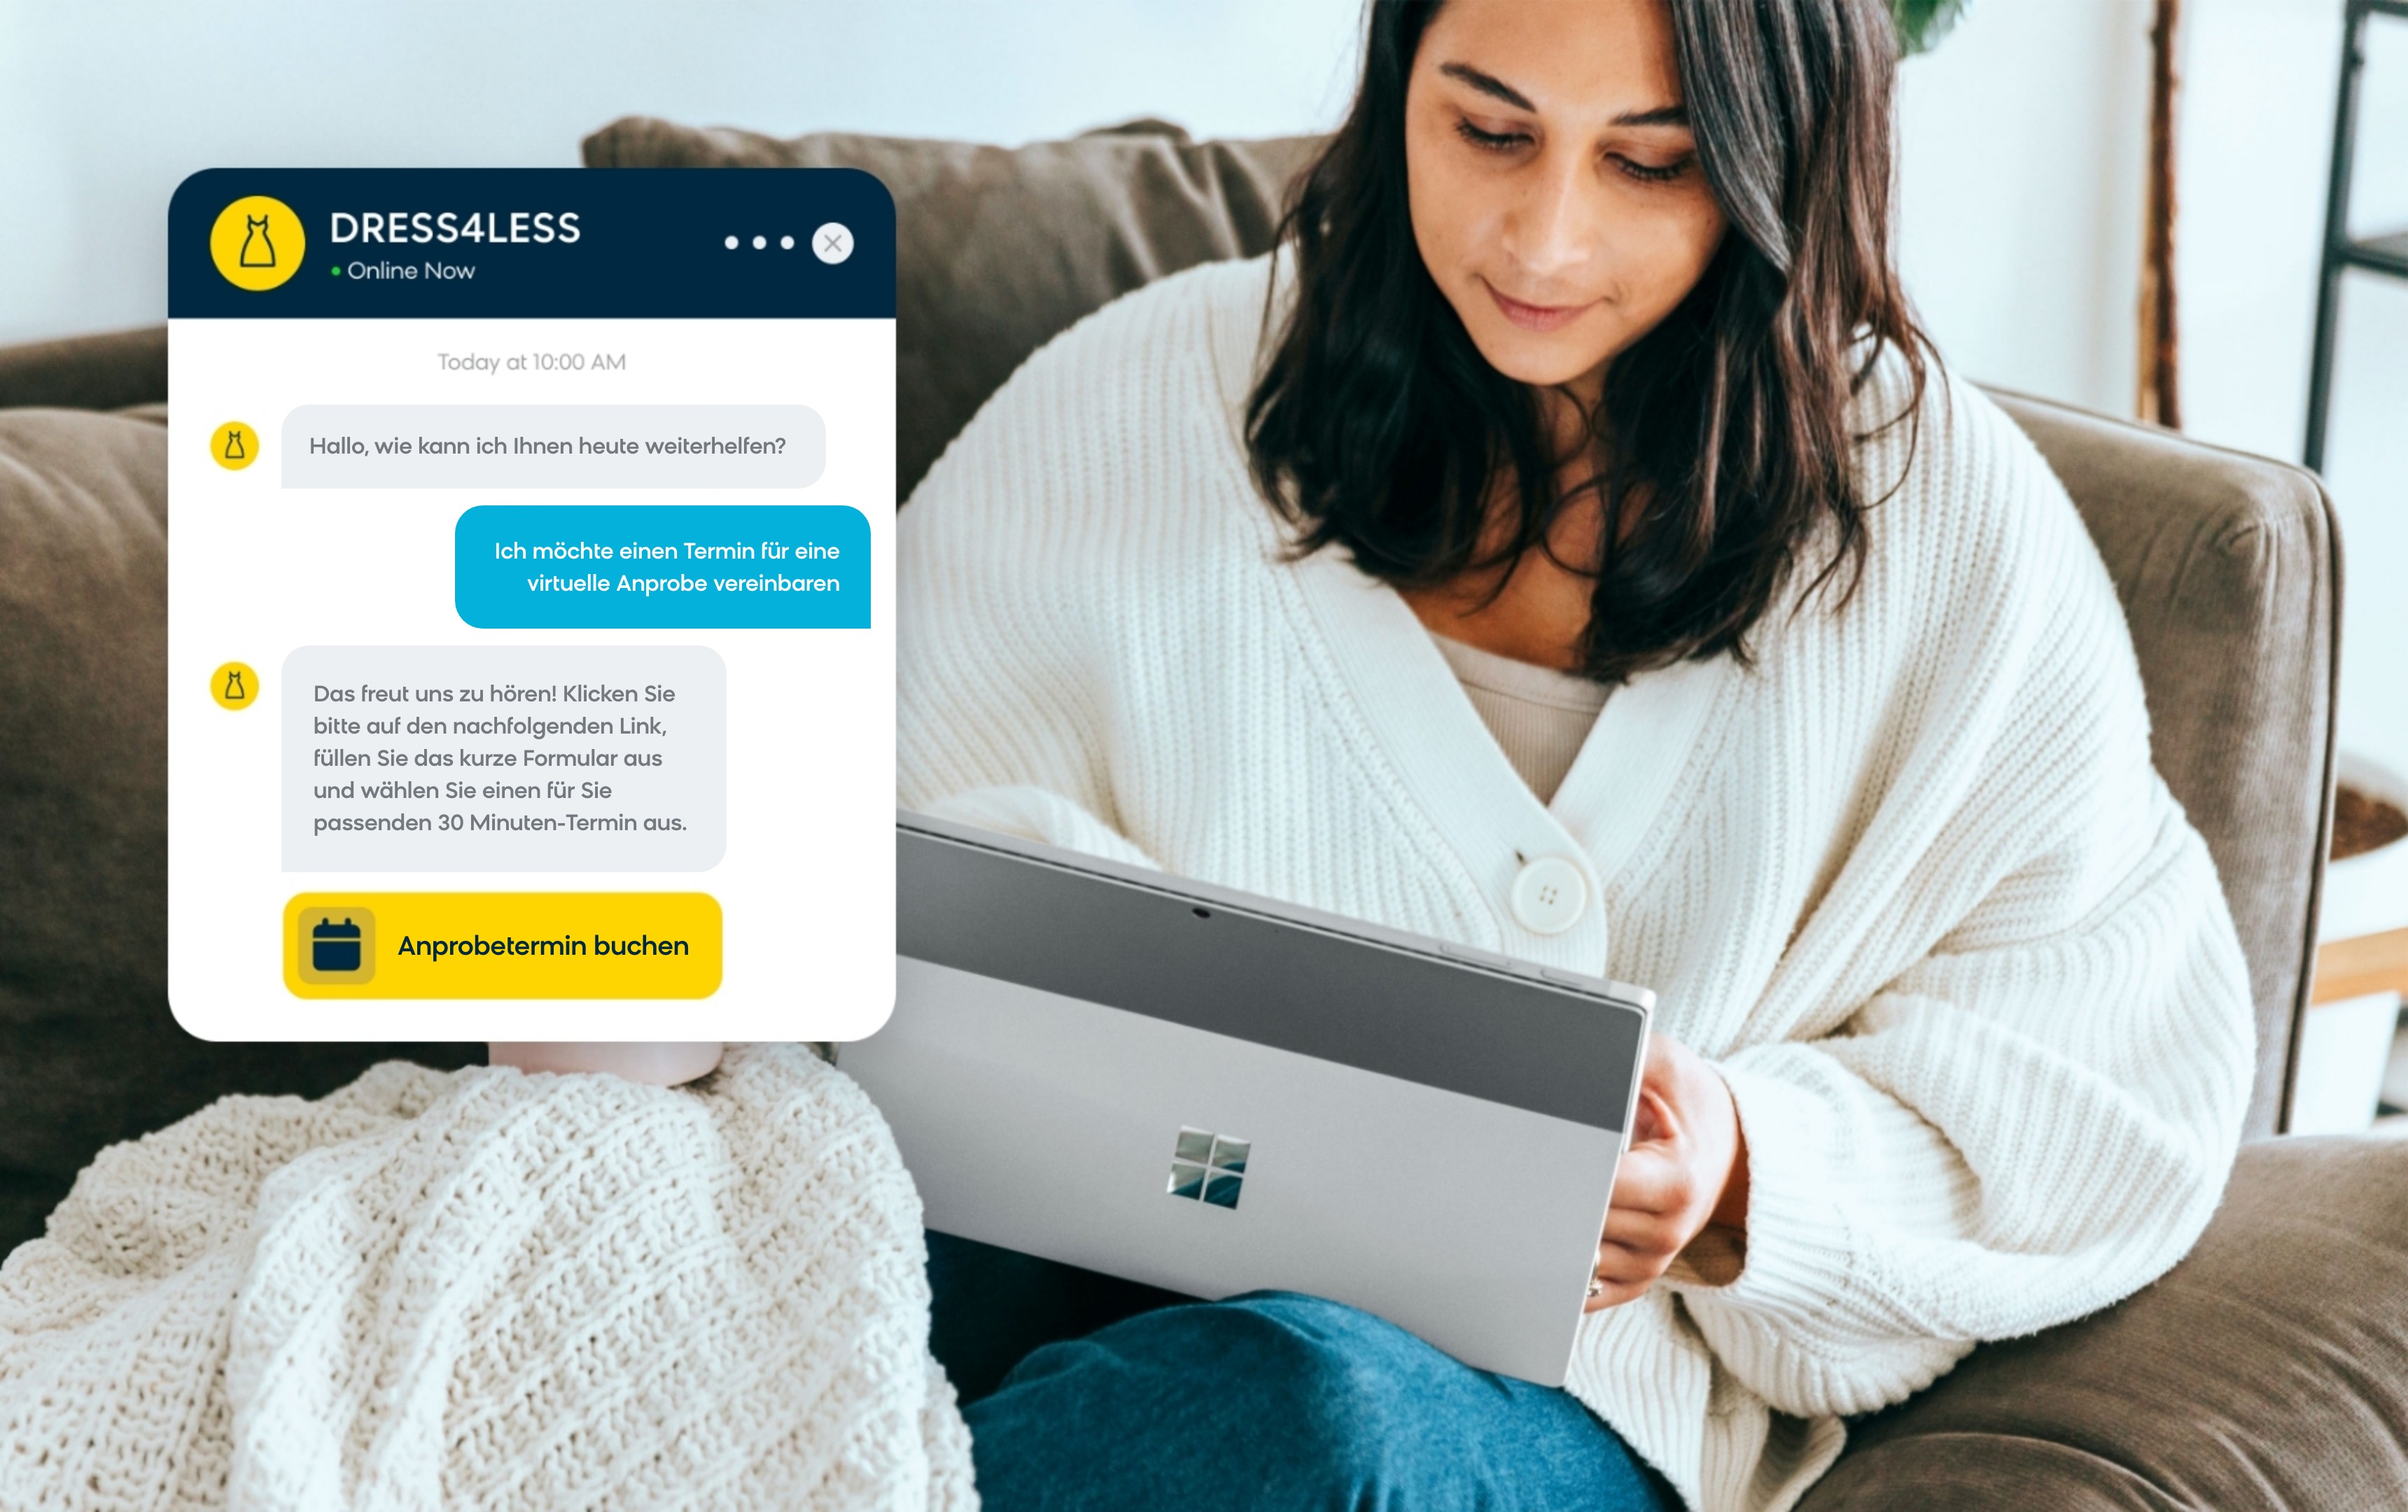 Example of using AI for conversational commerce